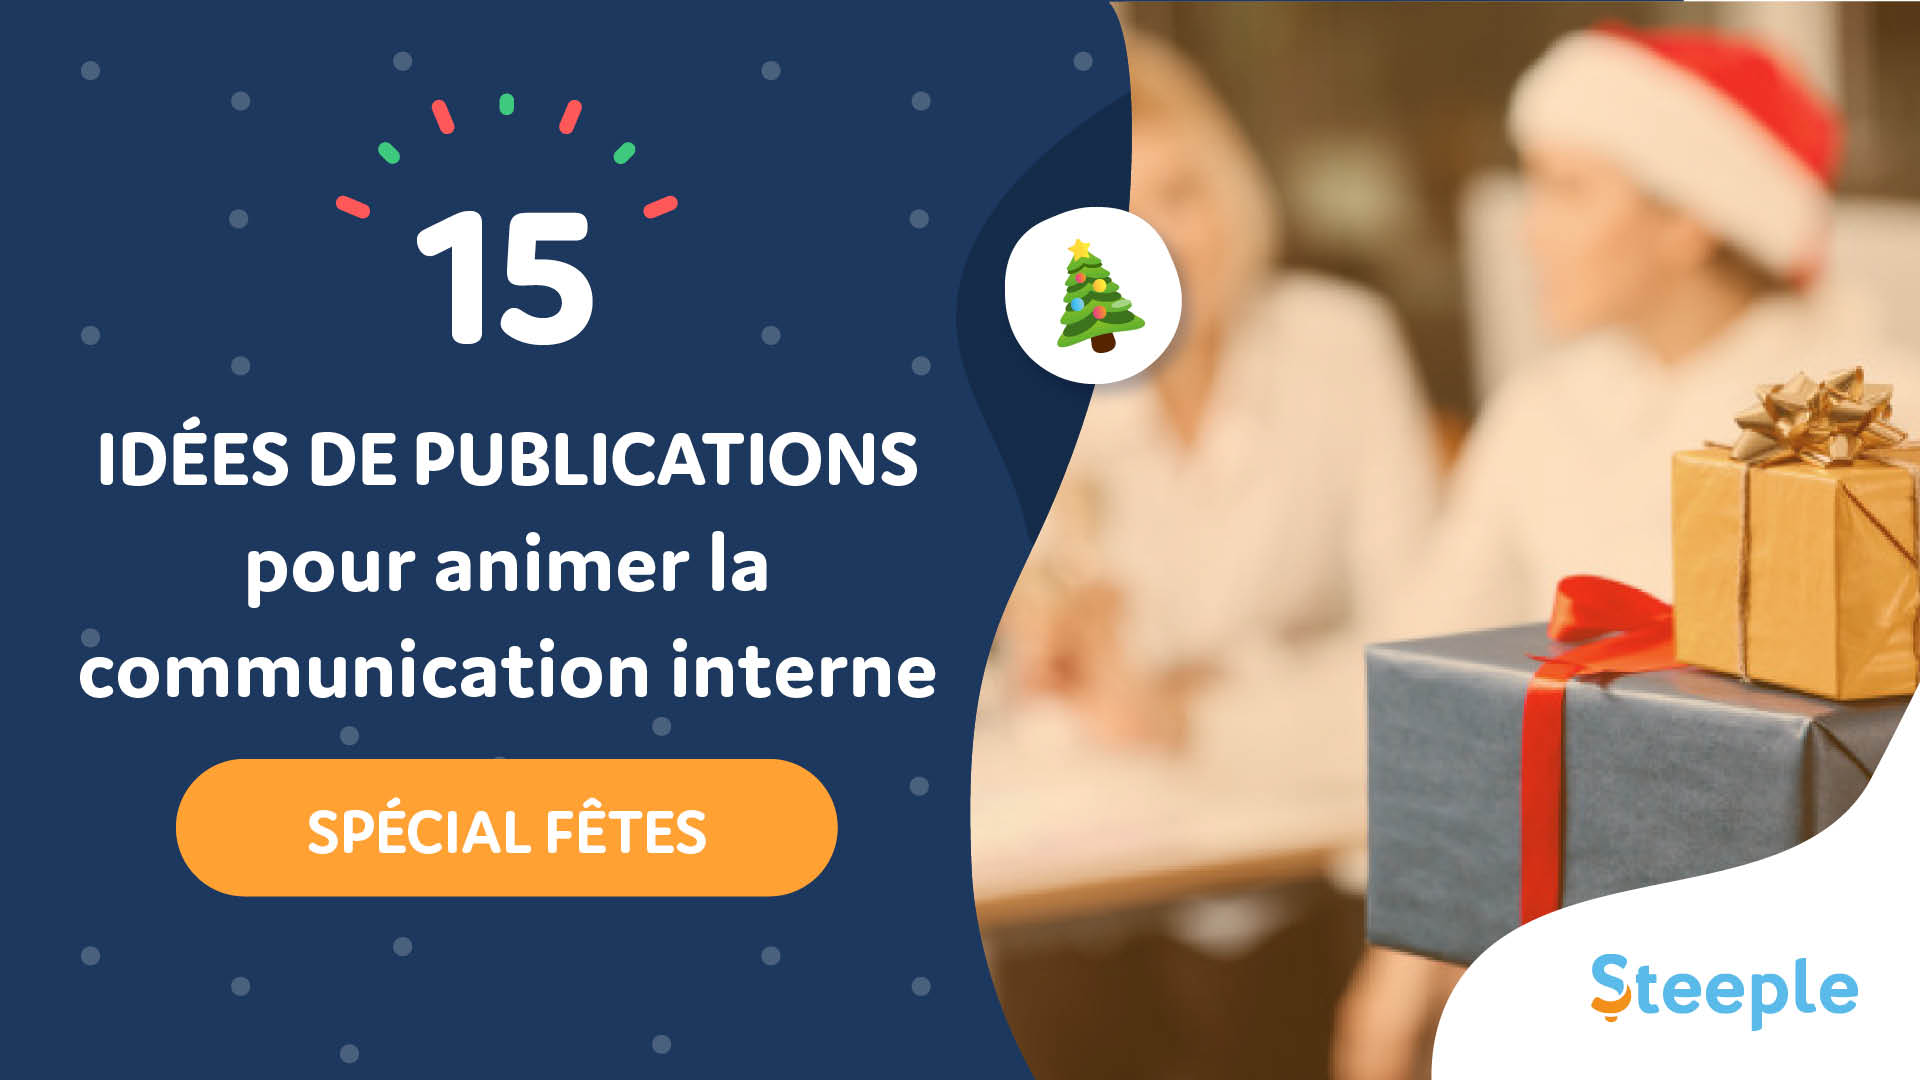 special-fete-15-idees-publications-01-1